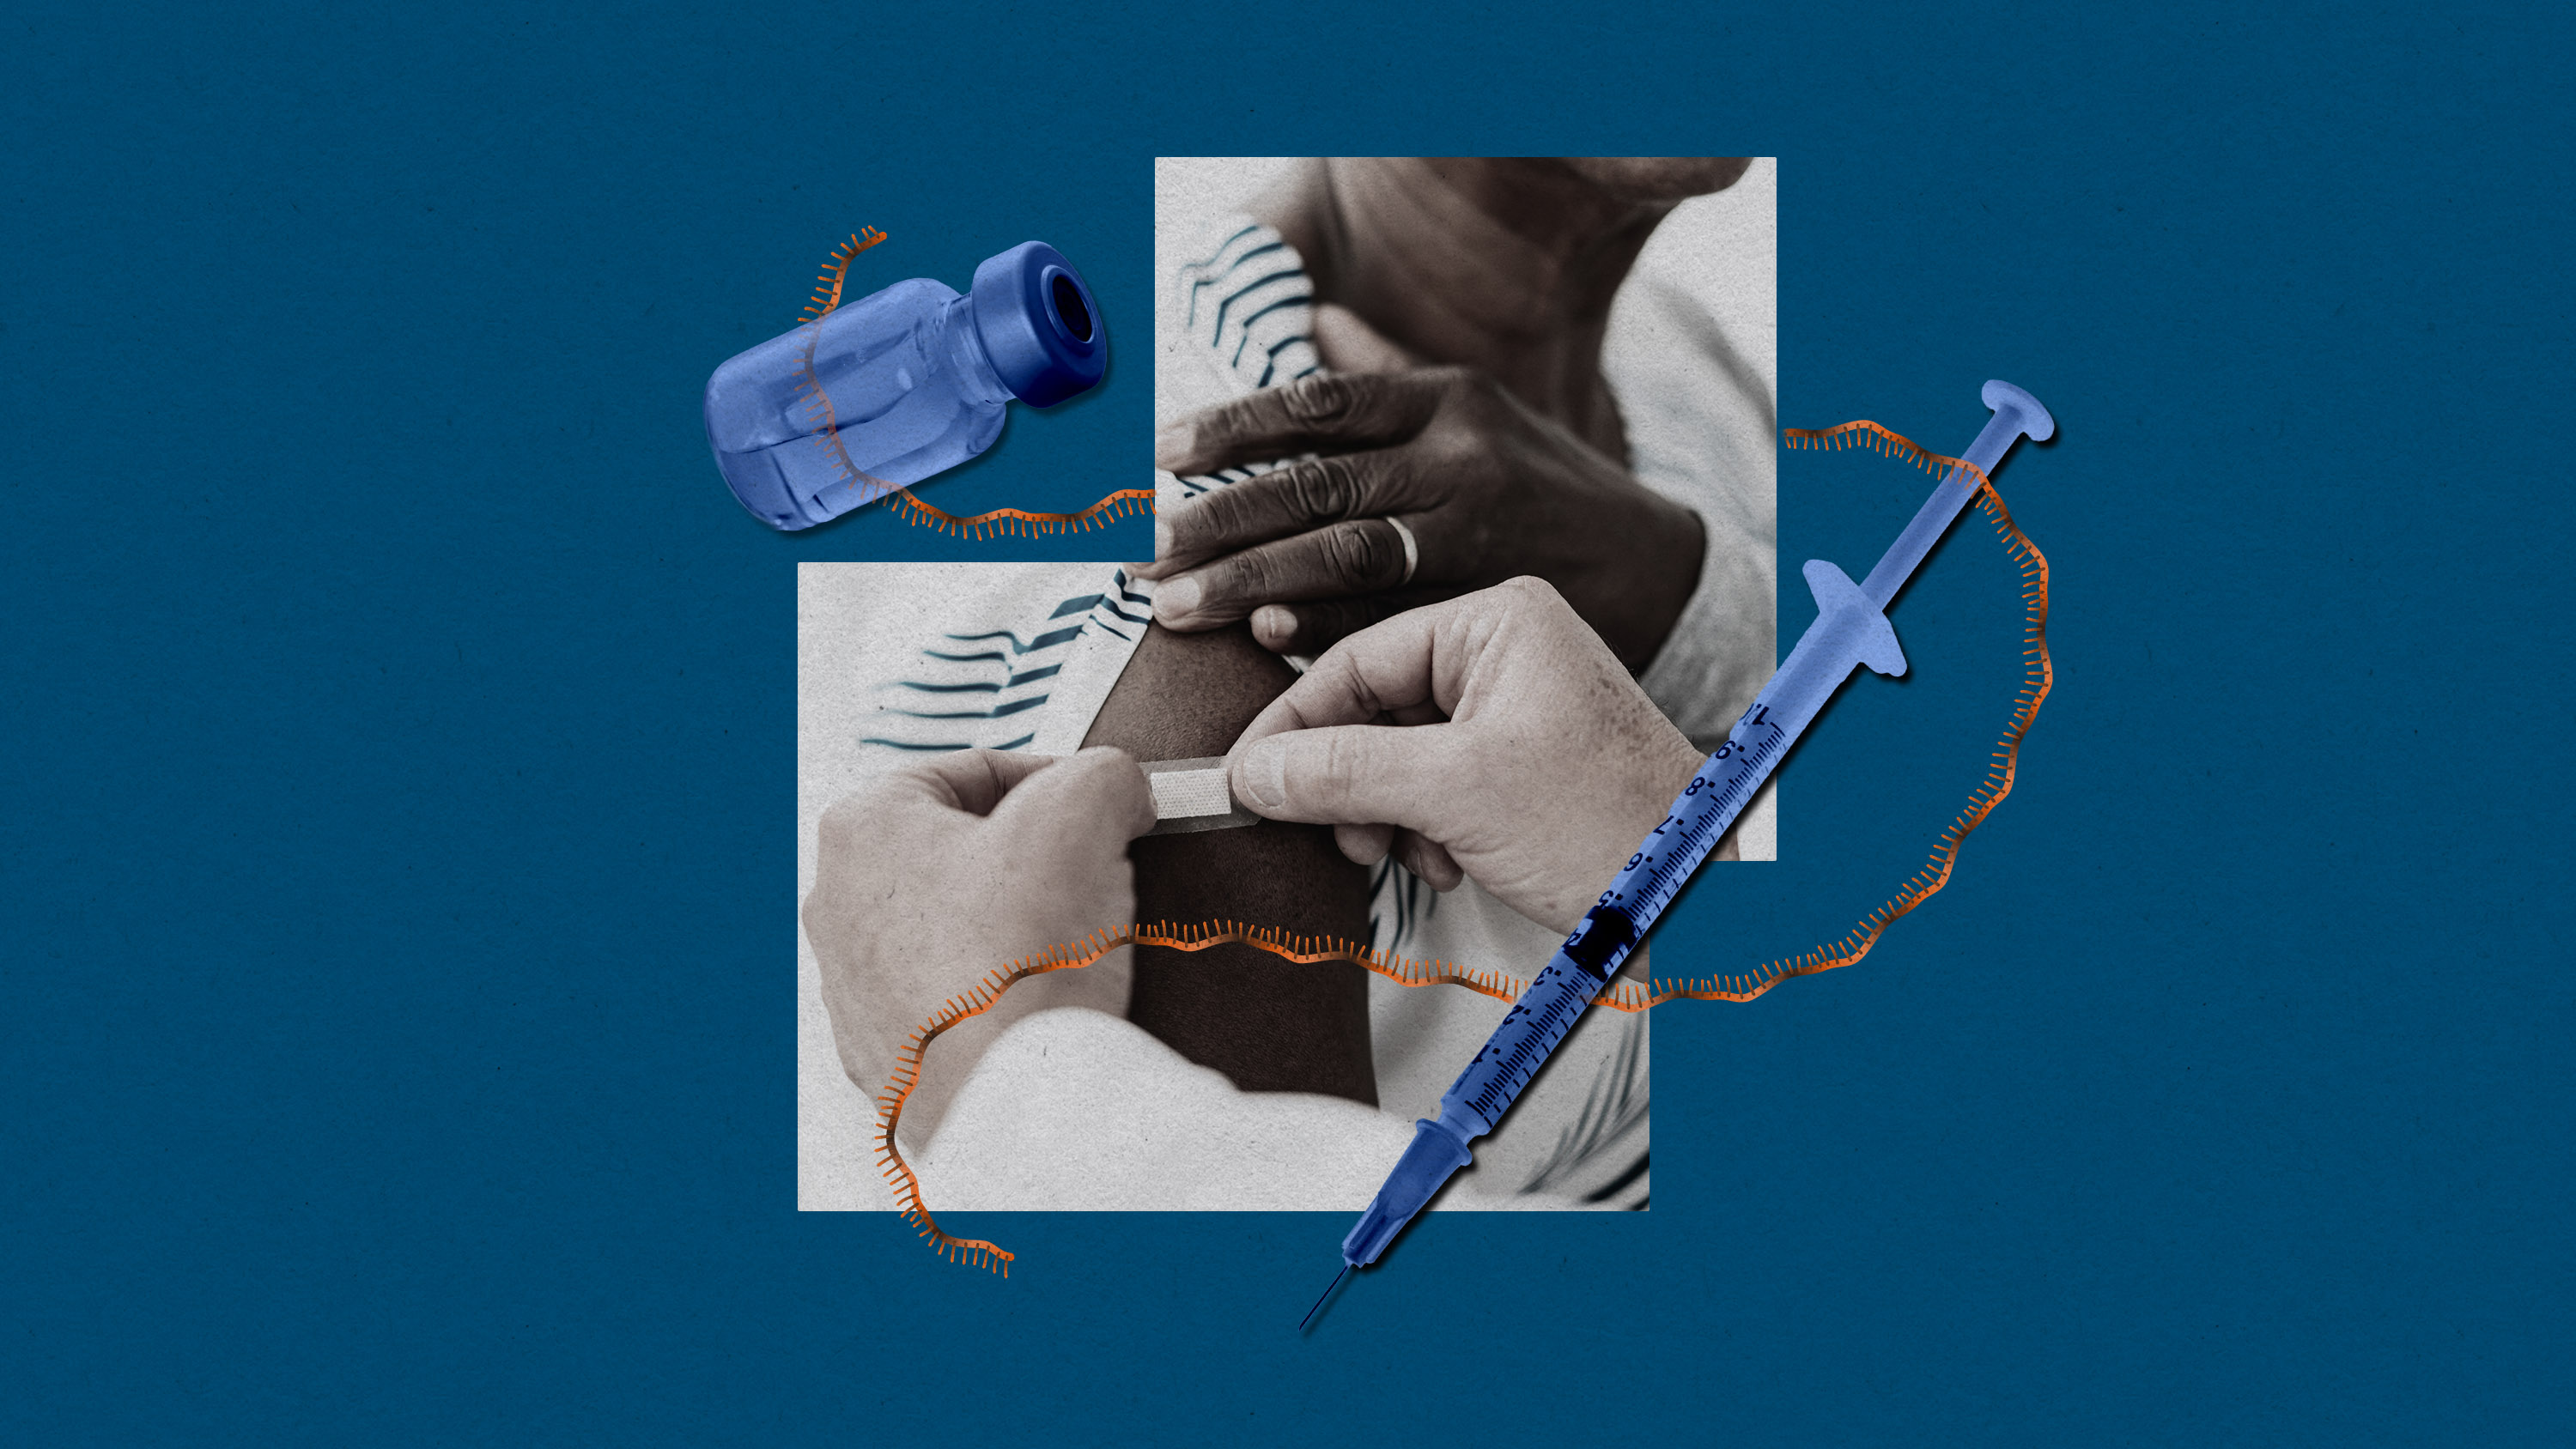 vial, mRNA ribbon and syringe around cropped photo of patient getting band-aid applied to arm